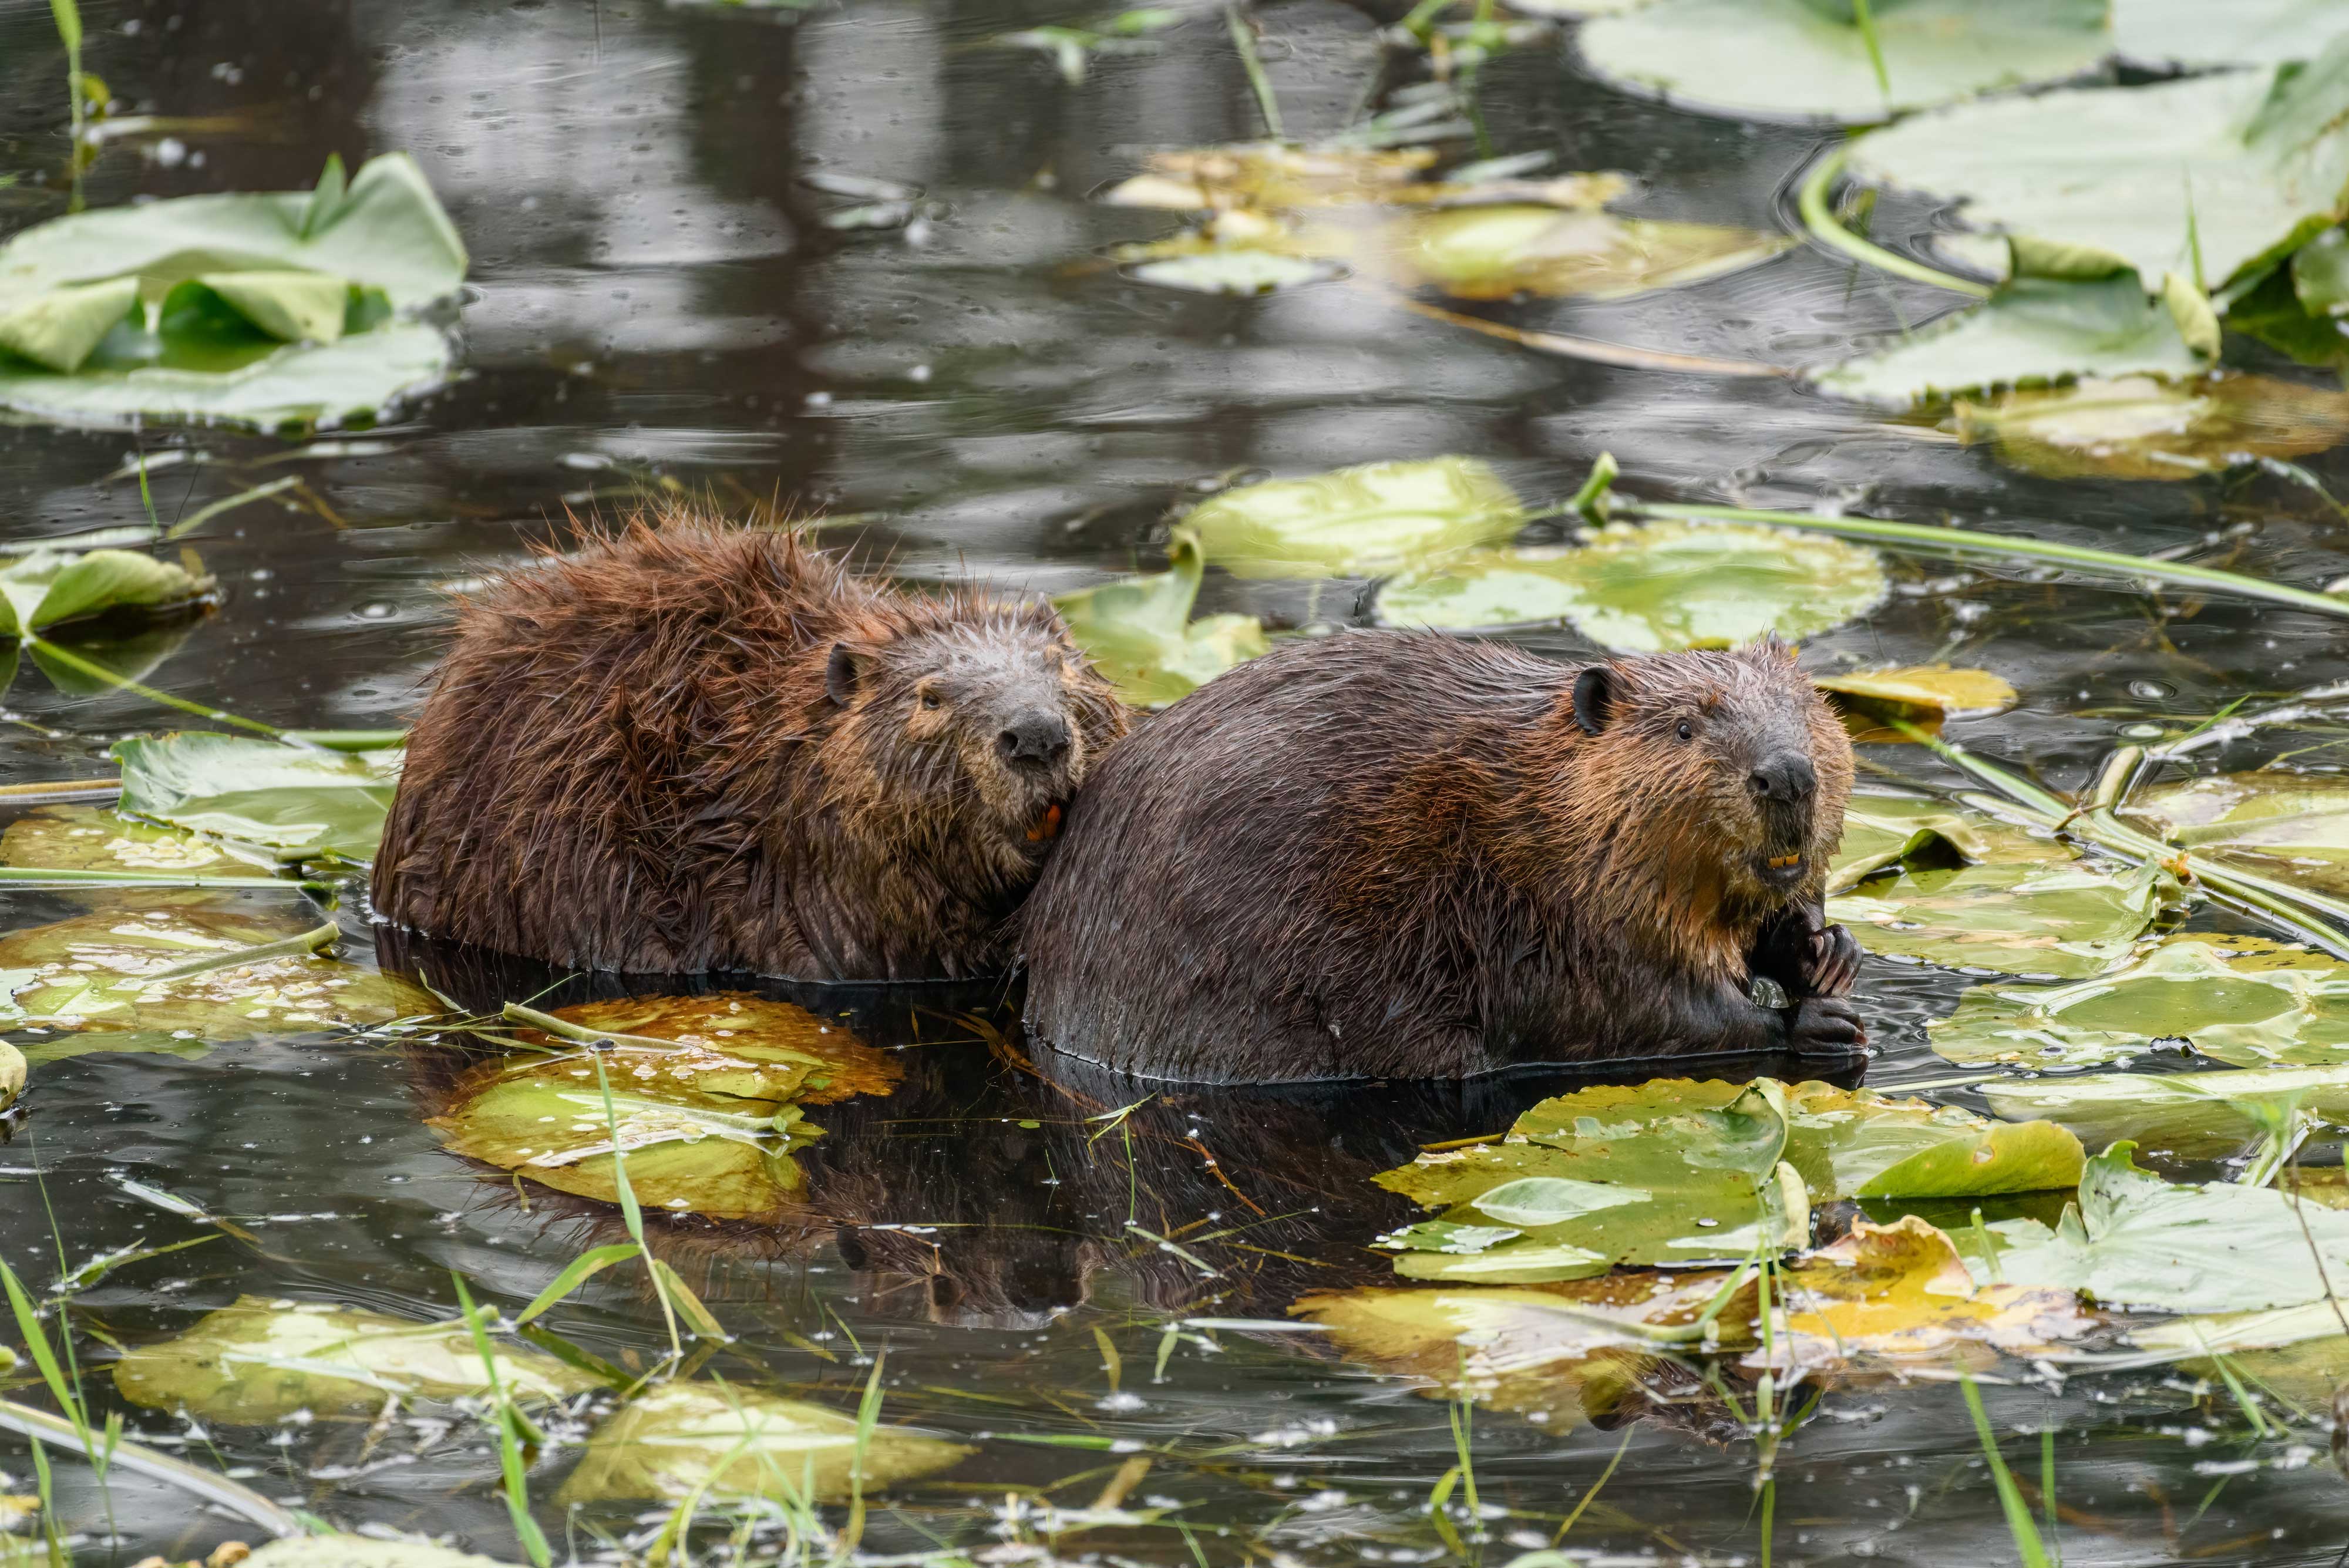 Two beavers huddling together in the water.